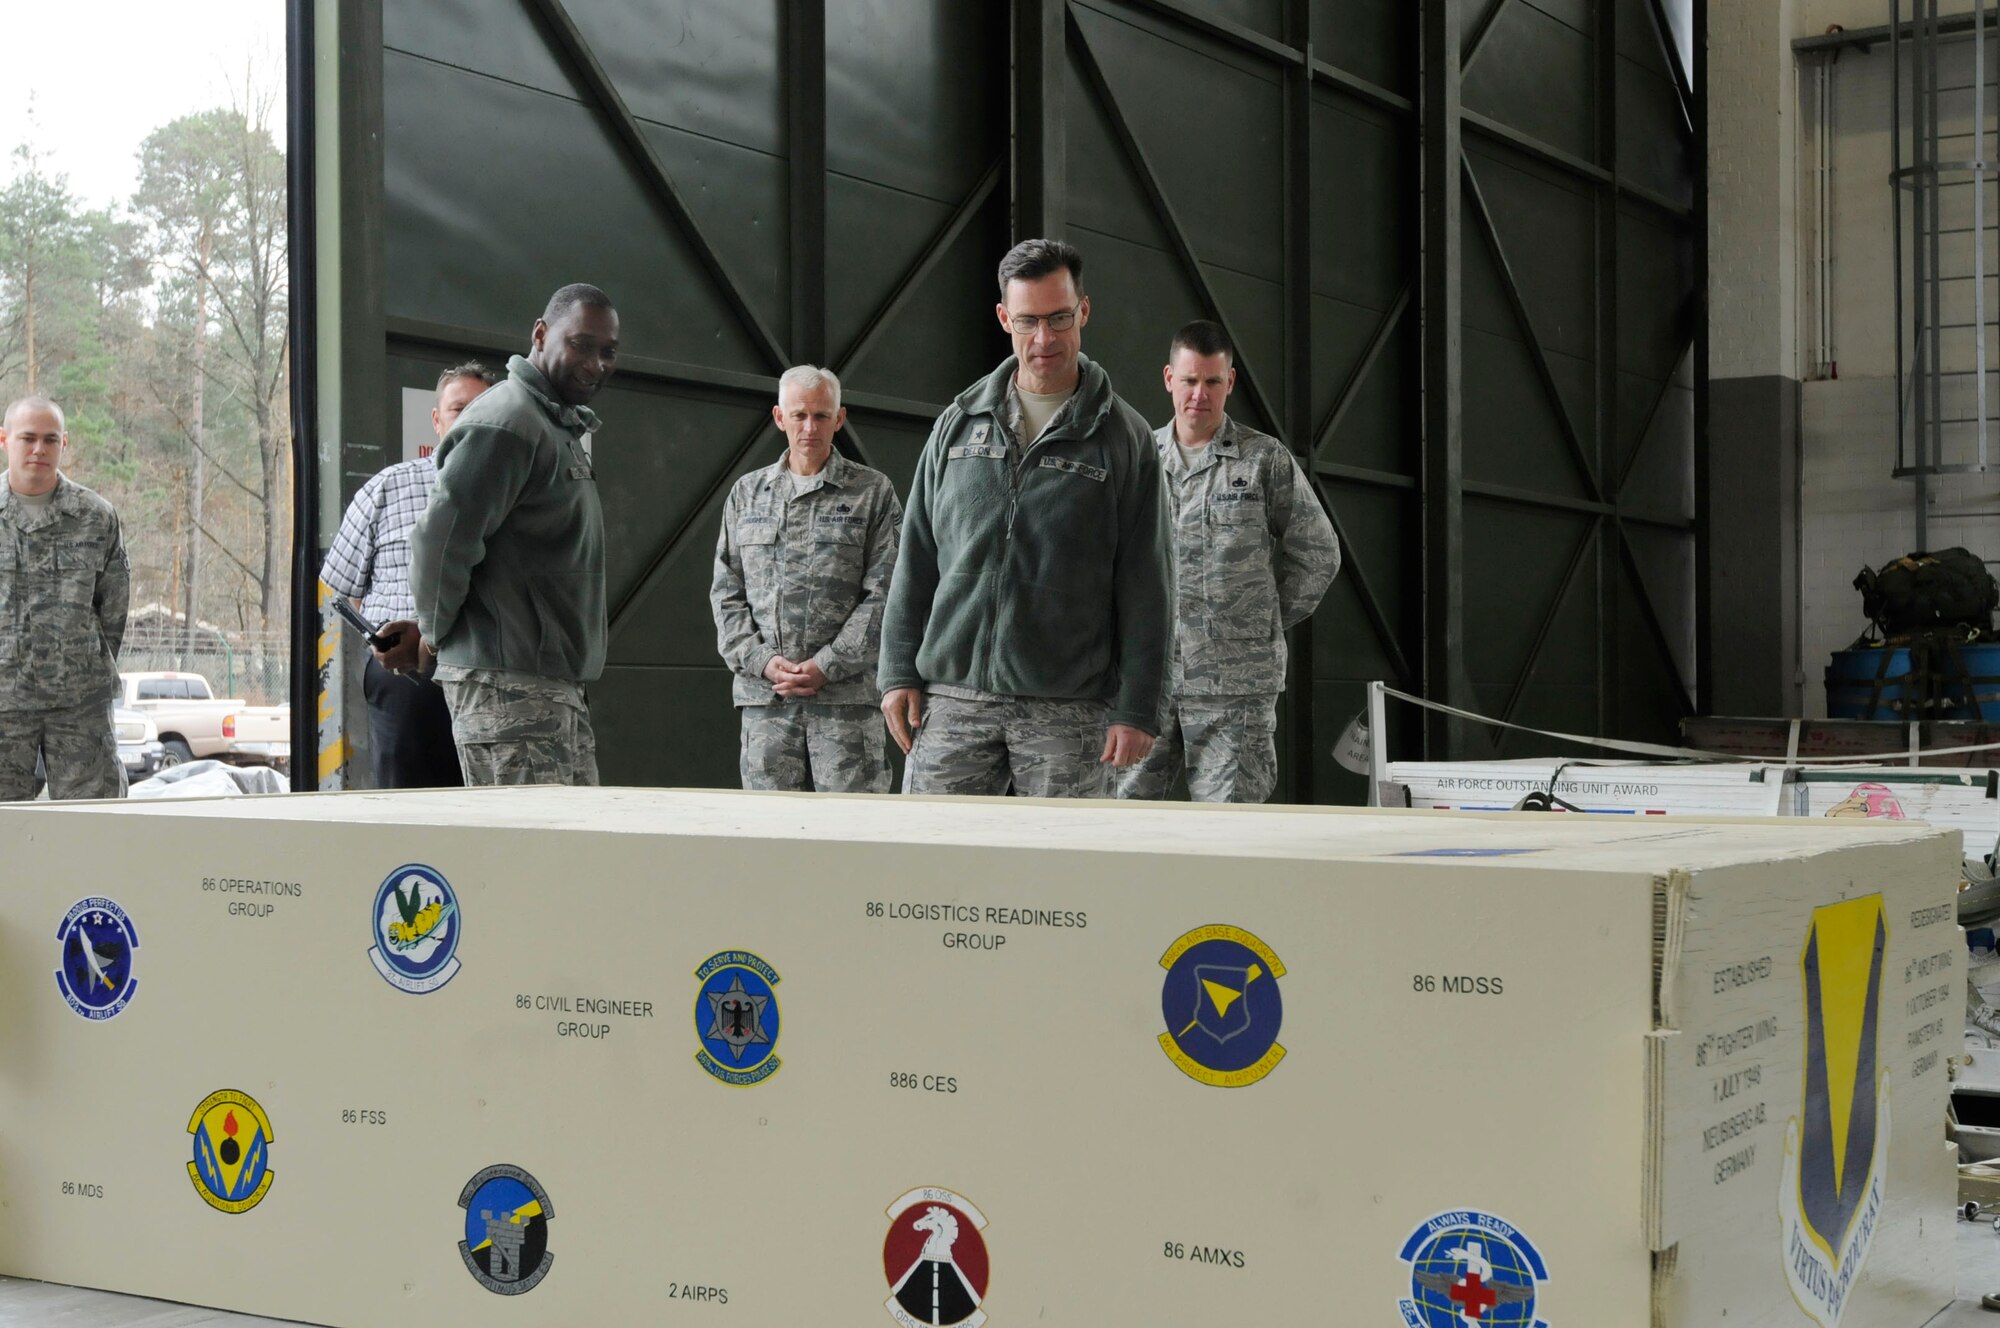 U.S. Air Force Brig. Gen. Mark Dillon, 86th Airlift Wing commander, and Chief Master Sgt. Vernon Butler, 86th AW command chief, observes a heavy training platform designed by Senior Airman Sarah Hathaway, 86th Logistics Readiness Squadron, Ramstein Air Base, Germany, April 4, 2011. The platform will be used to assist in training the 37th Airlift Squadron with heavy equipment airdrops. (U.S. Air Force photo by Airman Kendra Alba)